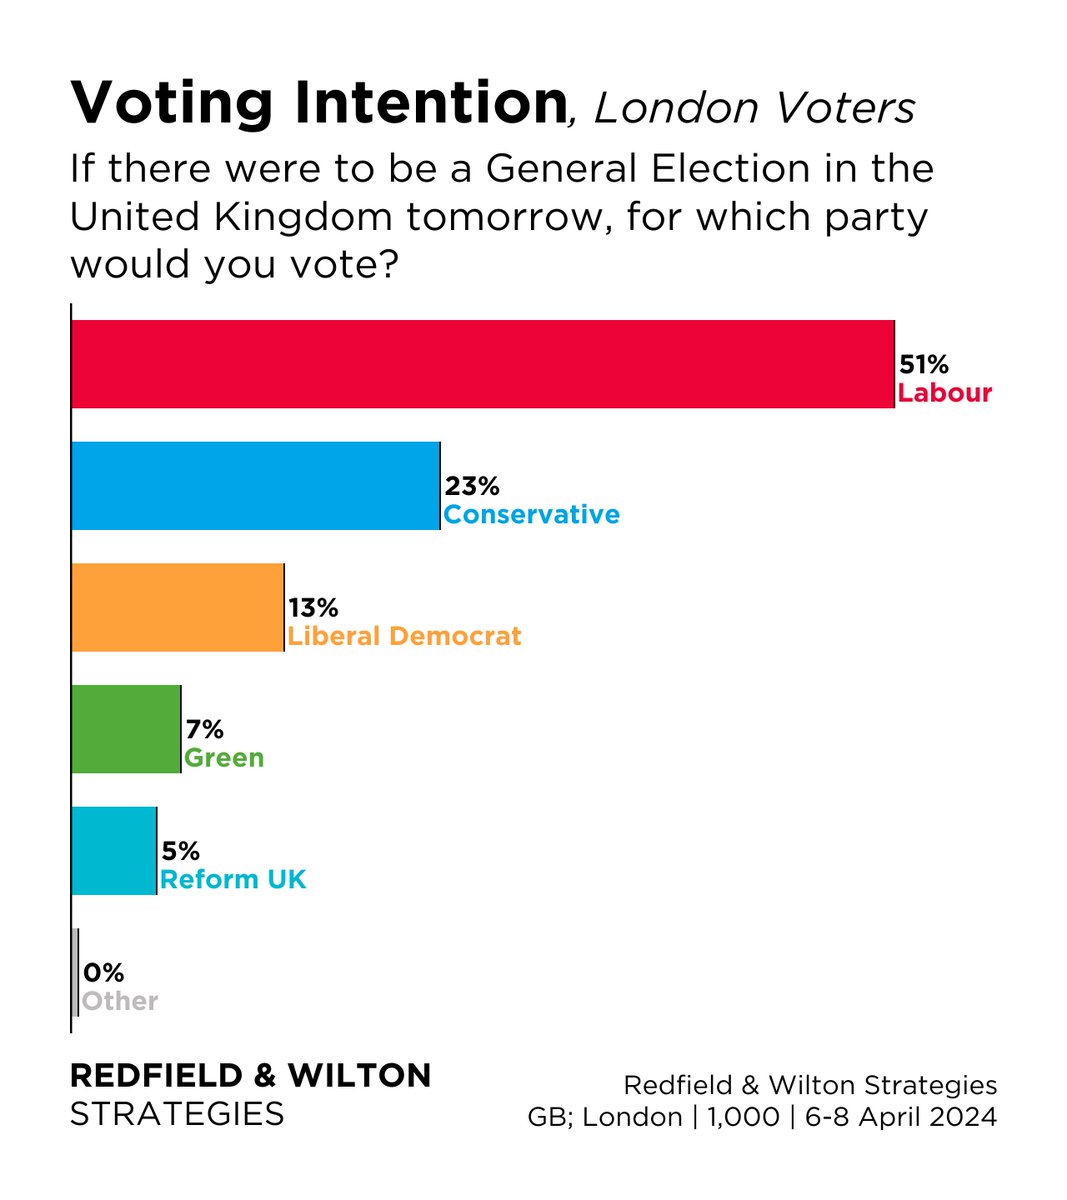 Labour leads the Conservatives by 28% in London. London Westminster VI (6-8 April): Labour 51% Conservative 23% Liberal Democrat 13% Green 7% Reform 5% Other 0% redfieldandwiltonstrategies.com/london-mayoral…